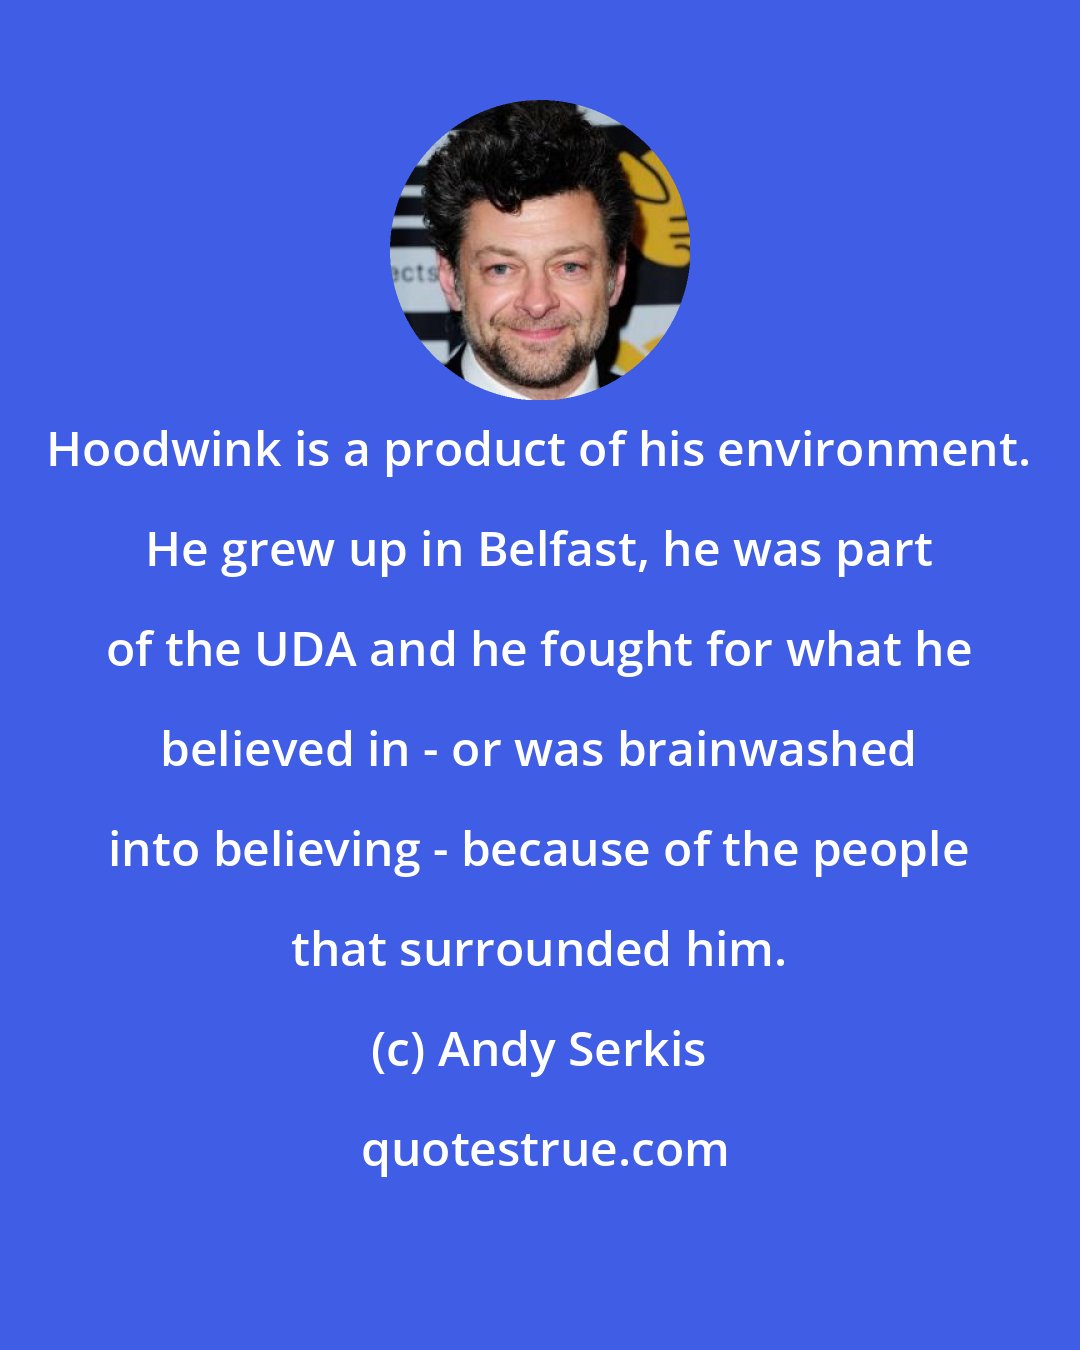 Andy Serkis: Hoodwink is a product of his environment. He grew up in Belfast, he was part of the UDA and he fought for what he believed in - or was brainwashed into believing - because of the people that surrounded him.